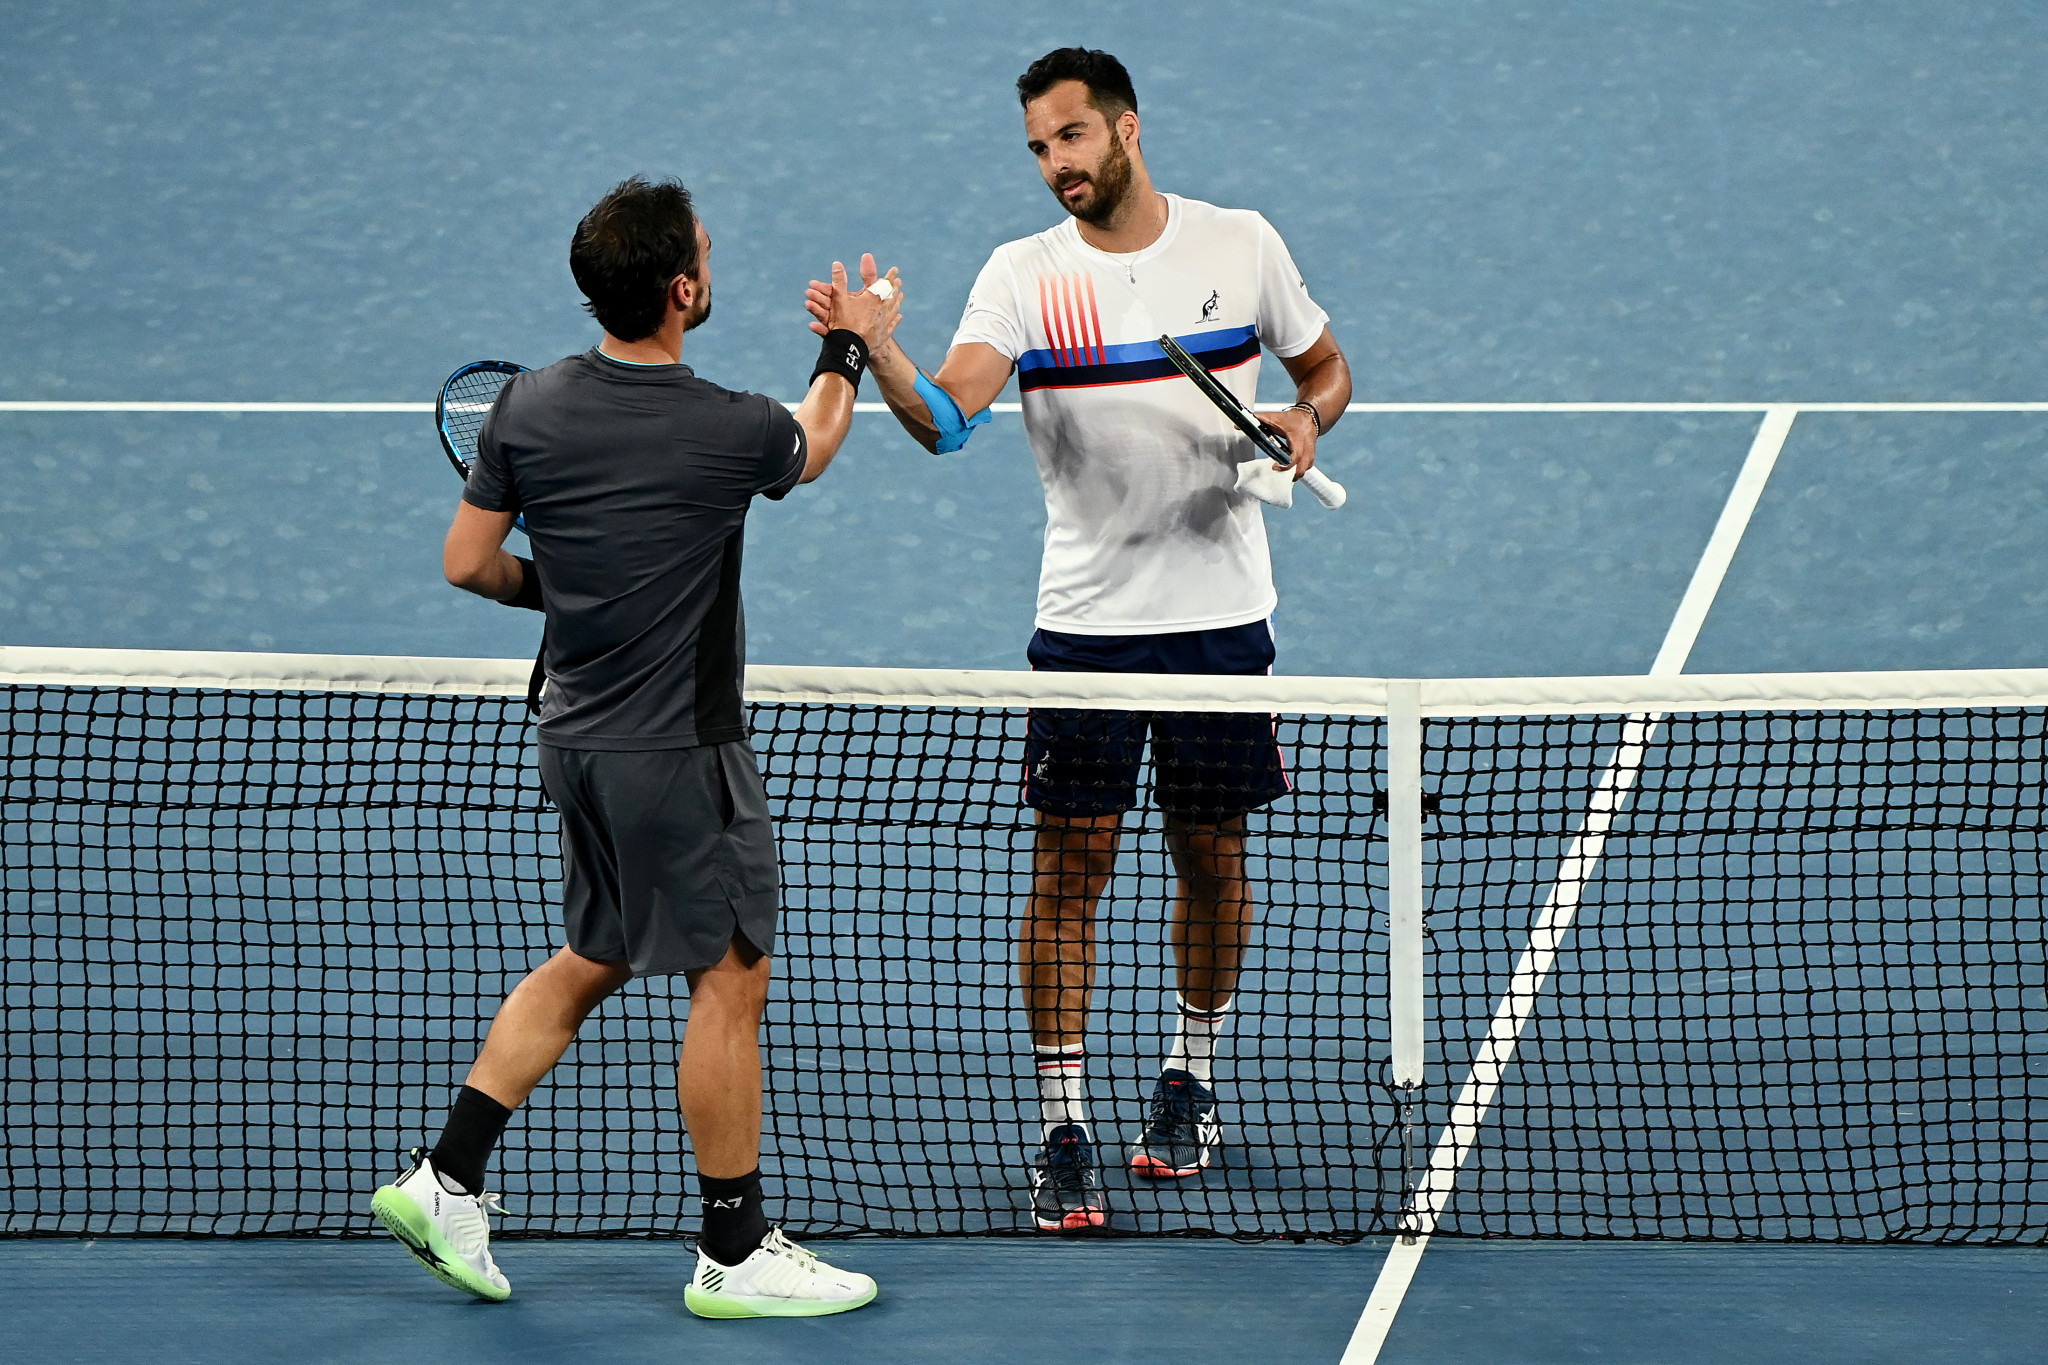 Italians Fabio Fognini and Salvatore Caruso (in white) embrace at the net following their match, shortly before the pair got involved in a heated exchange ©Getty Images